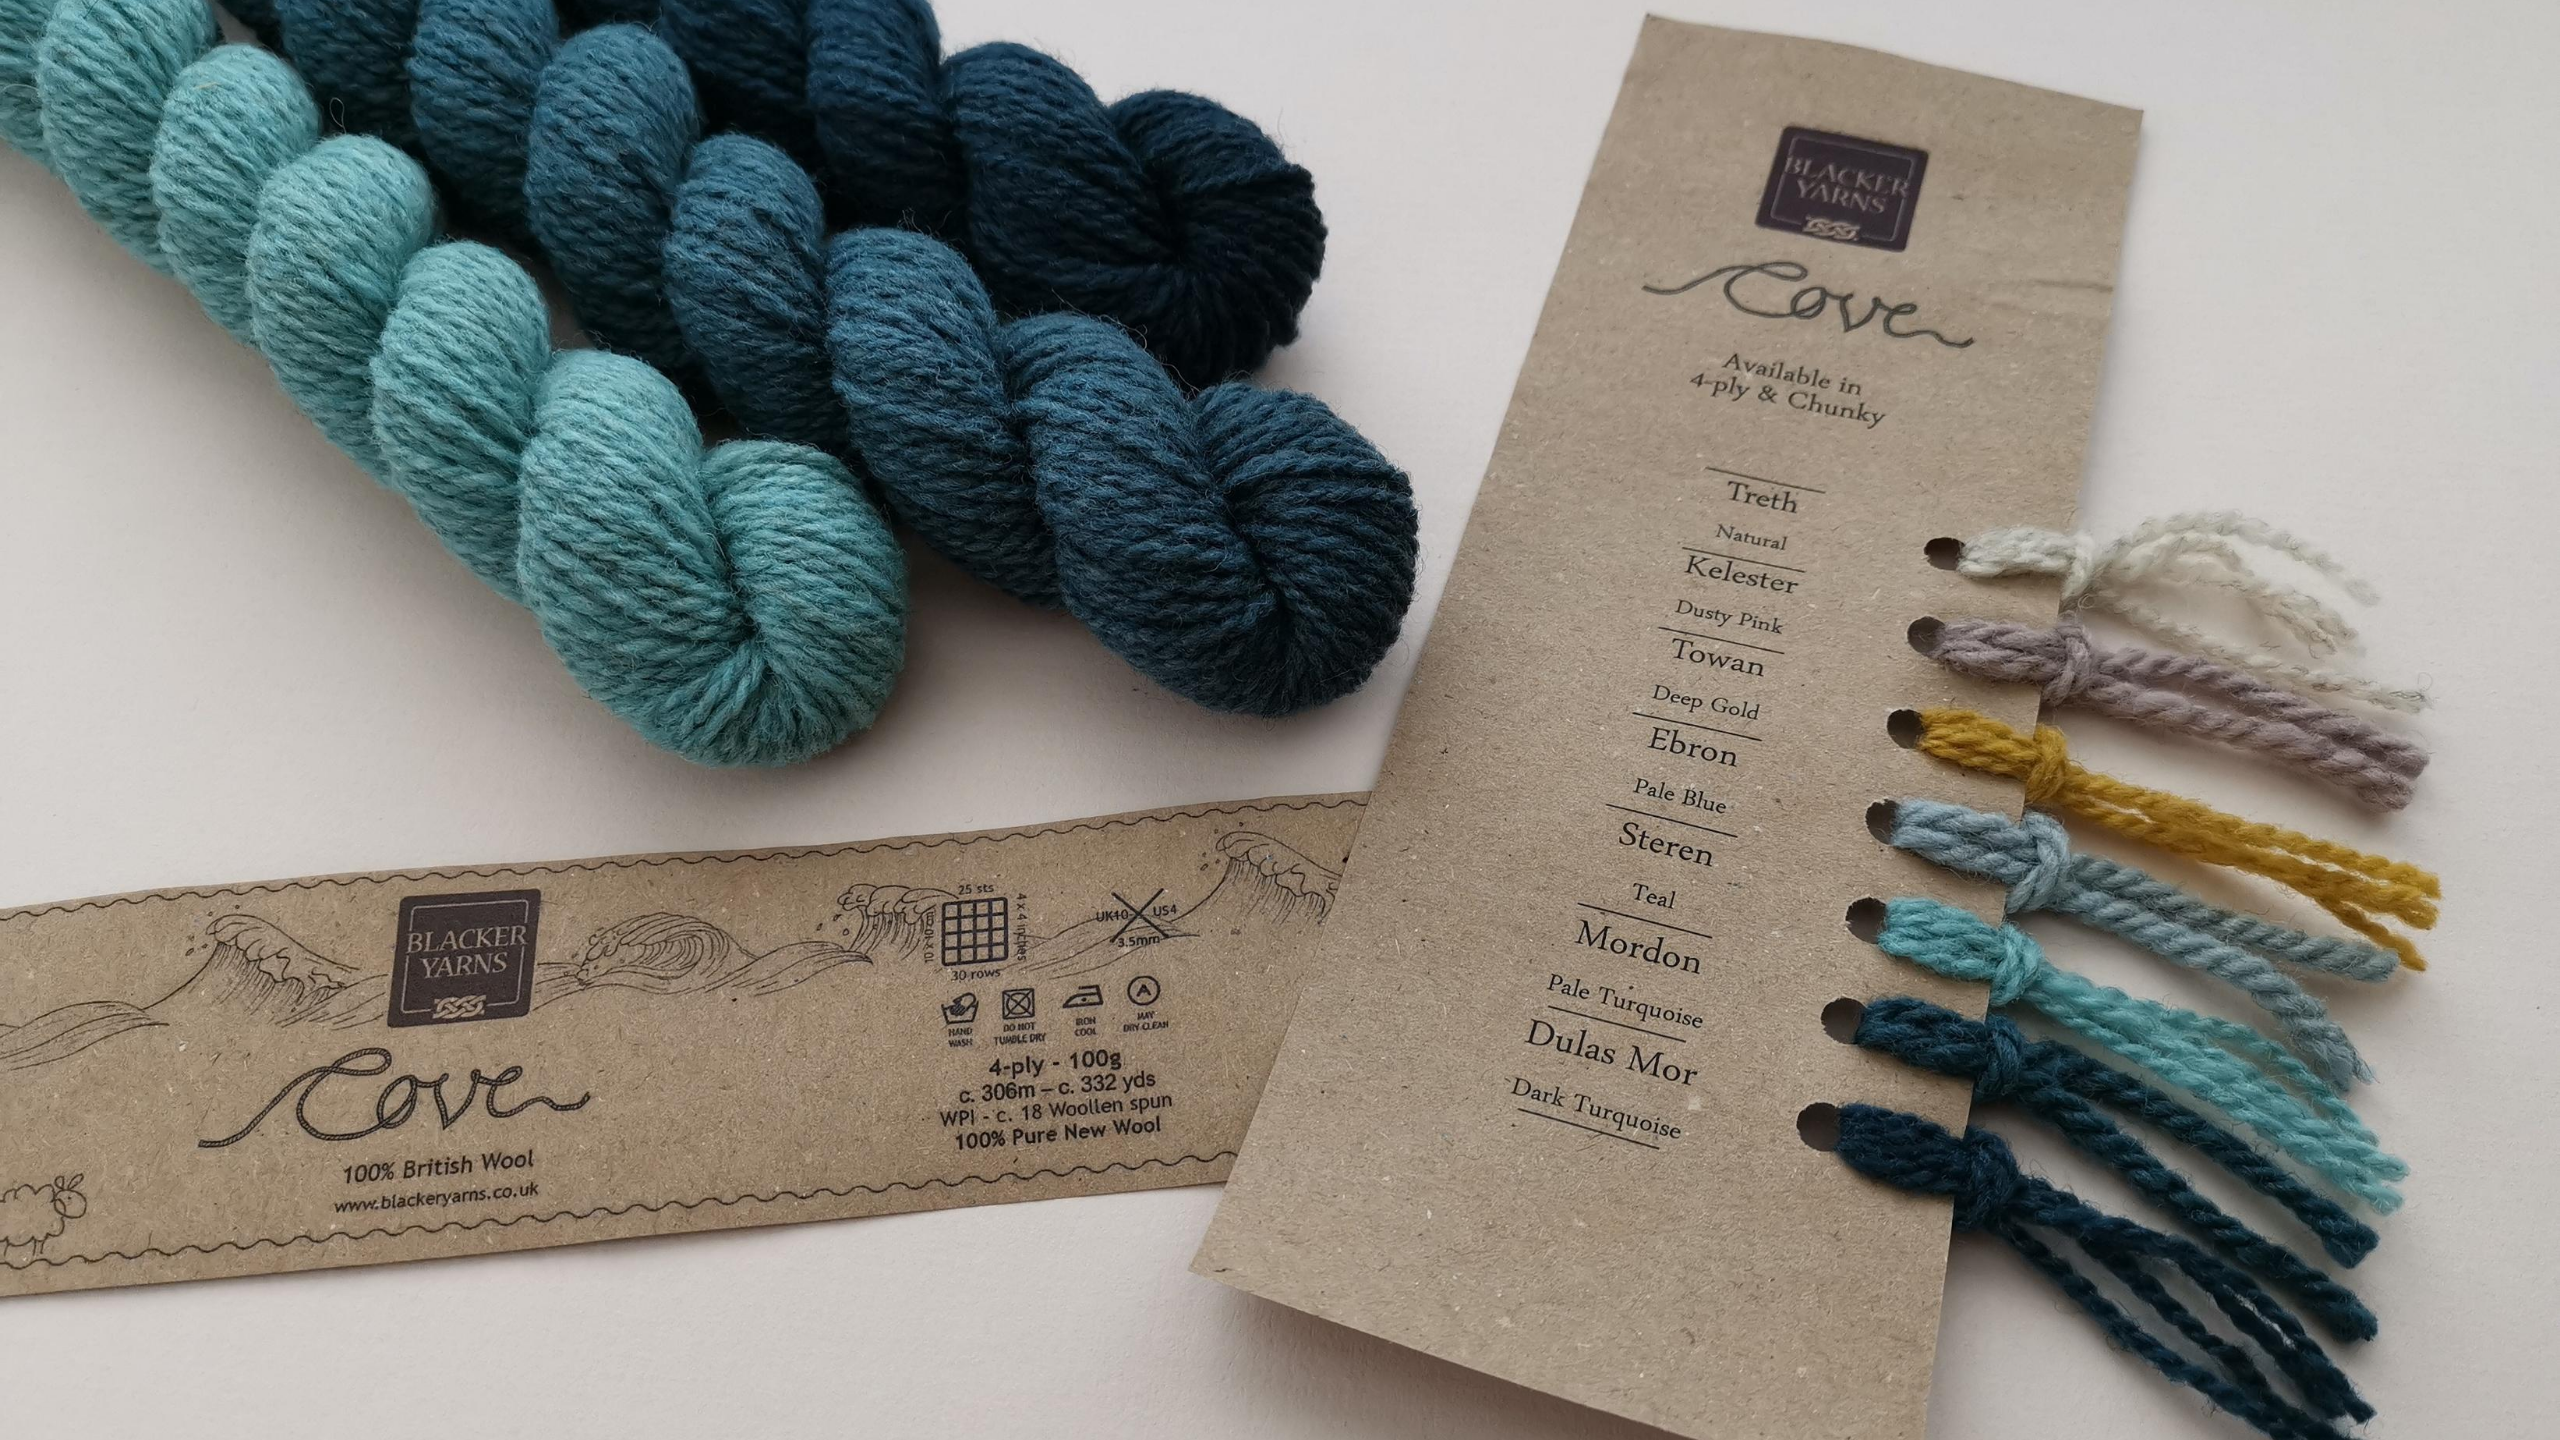 3 mini skeins of Cove Wool with shade card